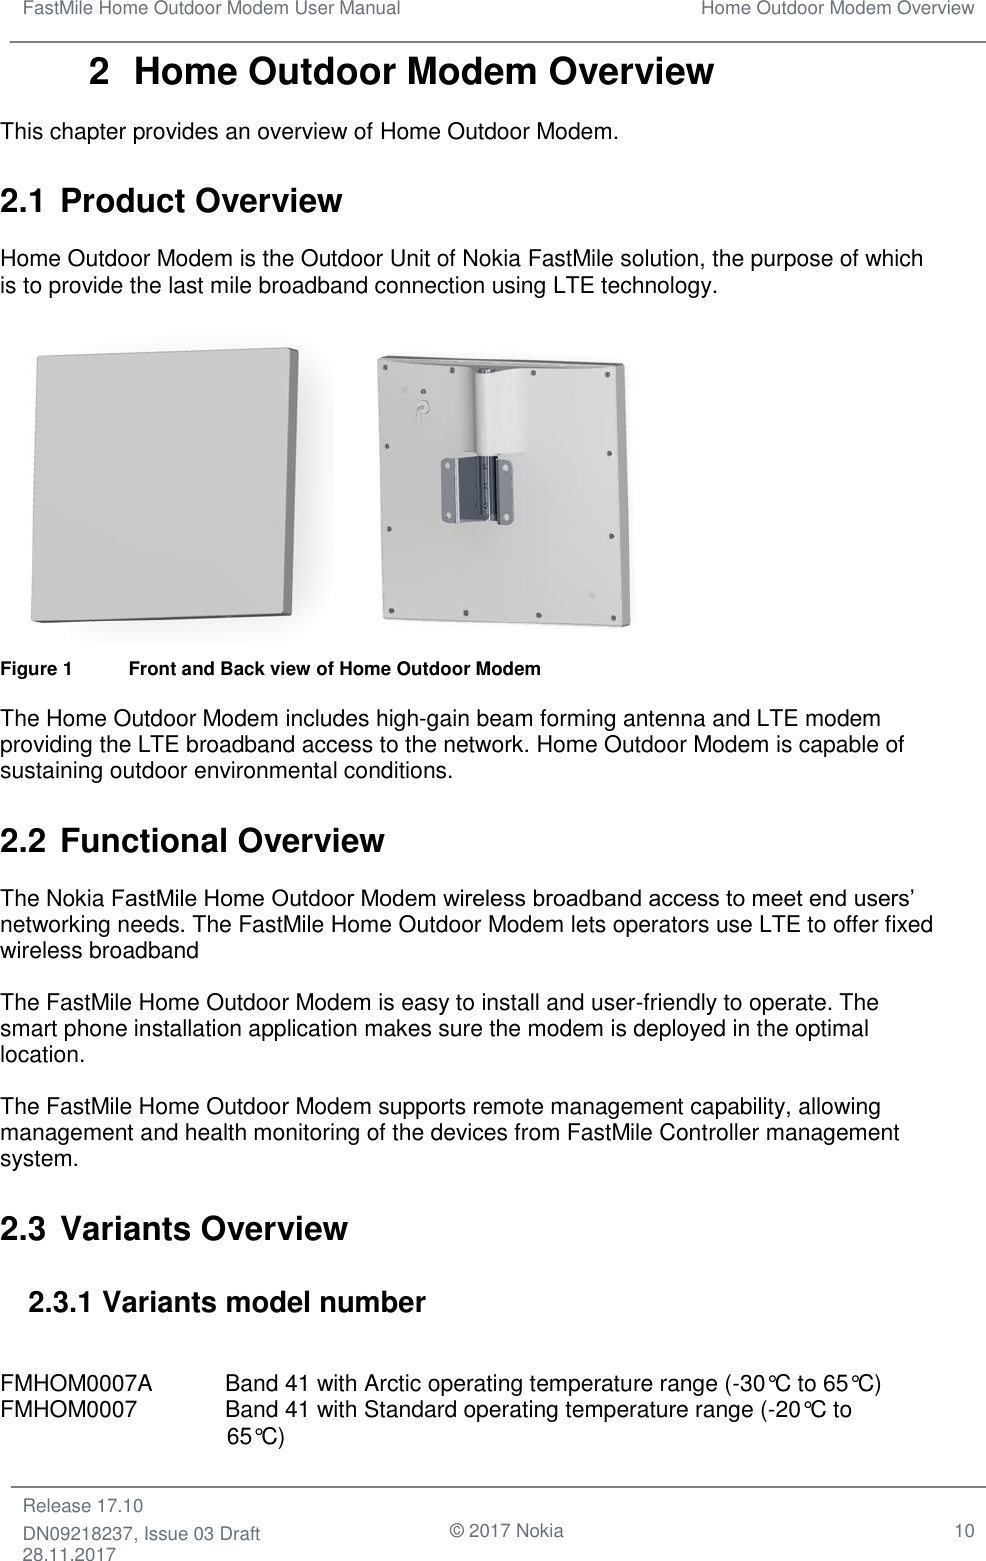 FastMile Home Outdoor Modem User Manual Home Outdoor Modem Overview  Release 17.10 DN09218237, Issue 03 Draft 28.11.2017                                © 2017 Nokia 10  2  Home Outdoor Modem Overview This chapter provides an overview of Home Outdoor Modem. 2.1 Product Overview Home Outdoor Modem is the Outdoor Unit of Nokia FastMile solution, the purpose of which is to provide the last mile broadband connection using LTE technology.   Figure 1    Front and Back view of Home Outdoor Modem The Home Outdoor Modem includes high-gain beam forming antenna and LTE modem providing the LTE broadband access to the network. Home Outdoor Modem is capable of sustaining outdoor environmental conditions. 2.2 Functional Overview The Nokia FastMile Home Outdoor Modem wireless broadband access to meet end users’ networking needs. The FastMile Home Outdoor Modem lets operators use LTE to offer fixed wireless broadband The FastMile Home Outdoor Modem is easy to install and user-friendly to operate. The smart phone installation application makes sure the modem is deployed in the optimal location.  The FastMile Home Outdoor Modem supports remote management capability, allowing management and health monitoring of the devices from FastMile Controller management system.  2.3 Variants Overview 2.3.1 Variants model number  FMHOM0007A  Band 41 with Arctic operating temperature range (-30°C to 65°C) FMHOM0007    Band 41 with Standard operating temperature range (-20°C to                  65°C) 